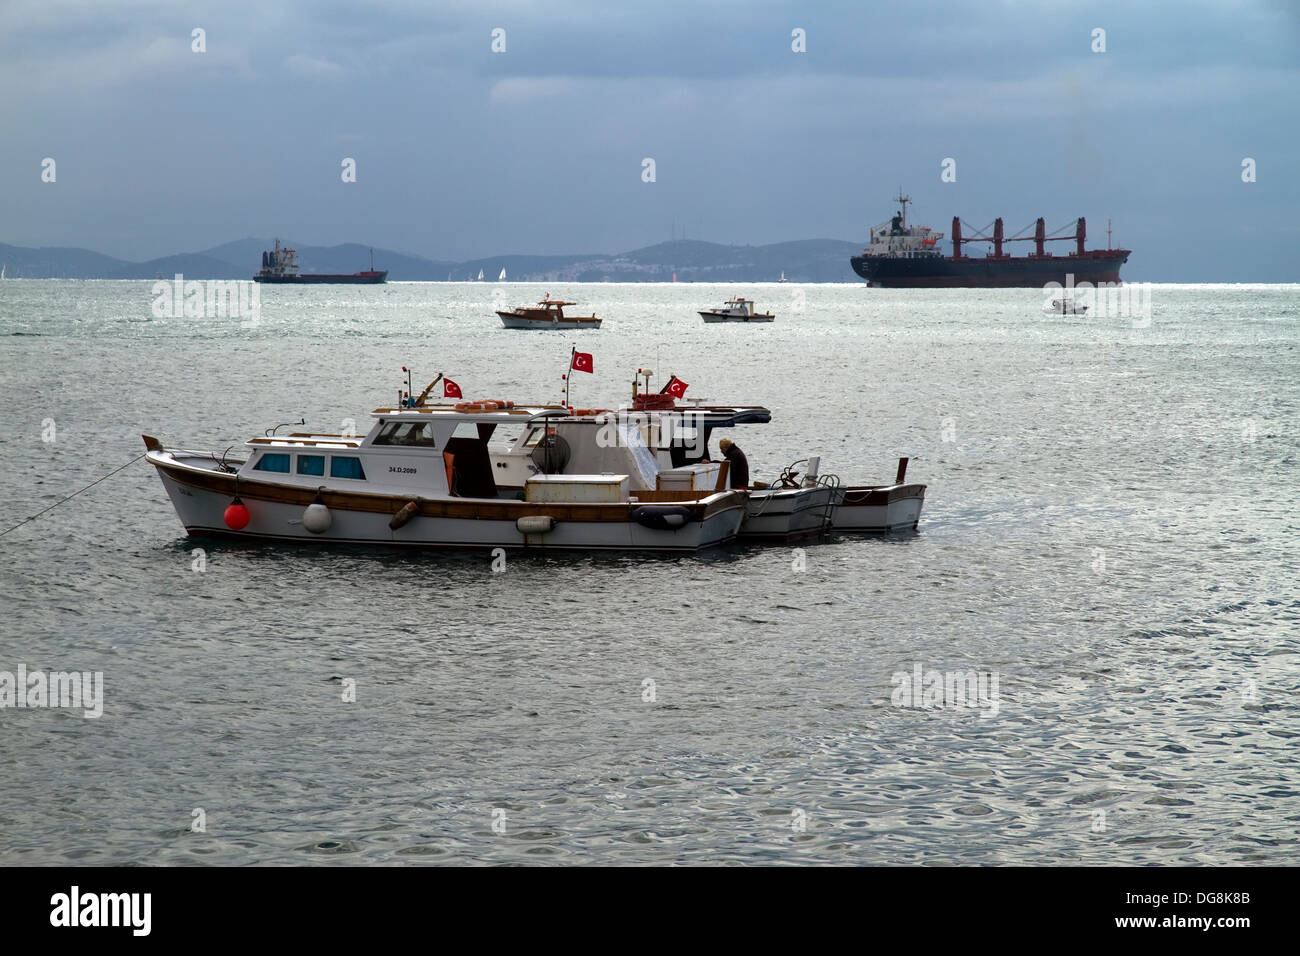 Local Fishing Boats Swaying on the Waves in Bosphorus on Against Cloudy Sky Stock Photo